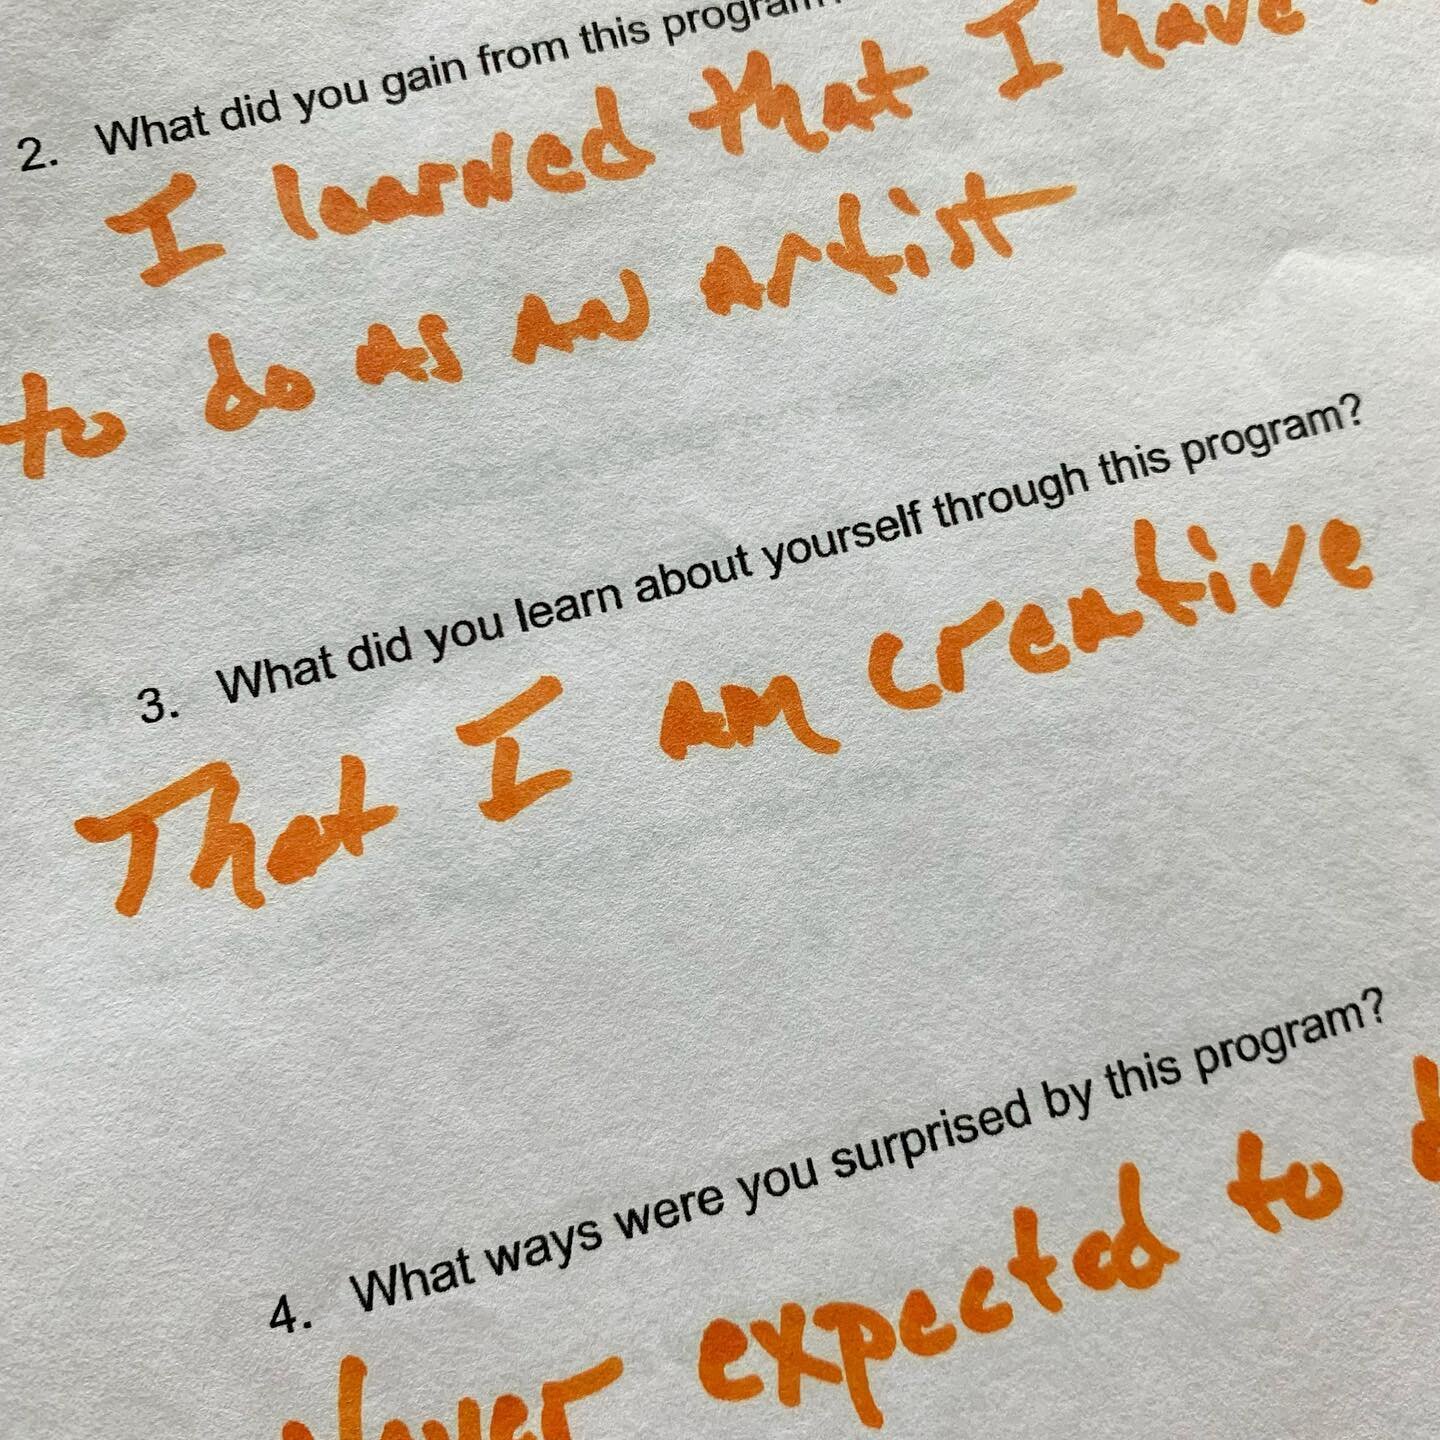 From participant evaluations&mdash;why we do what we do 😊